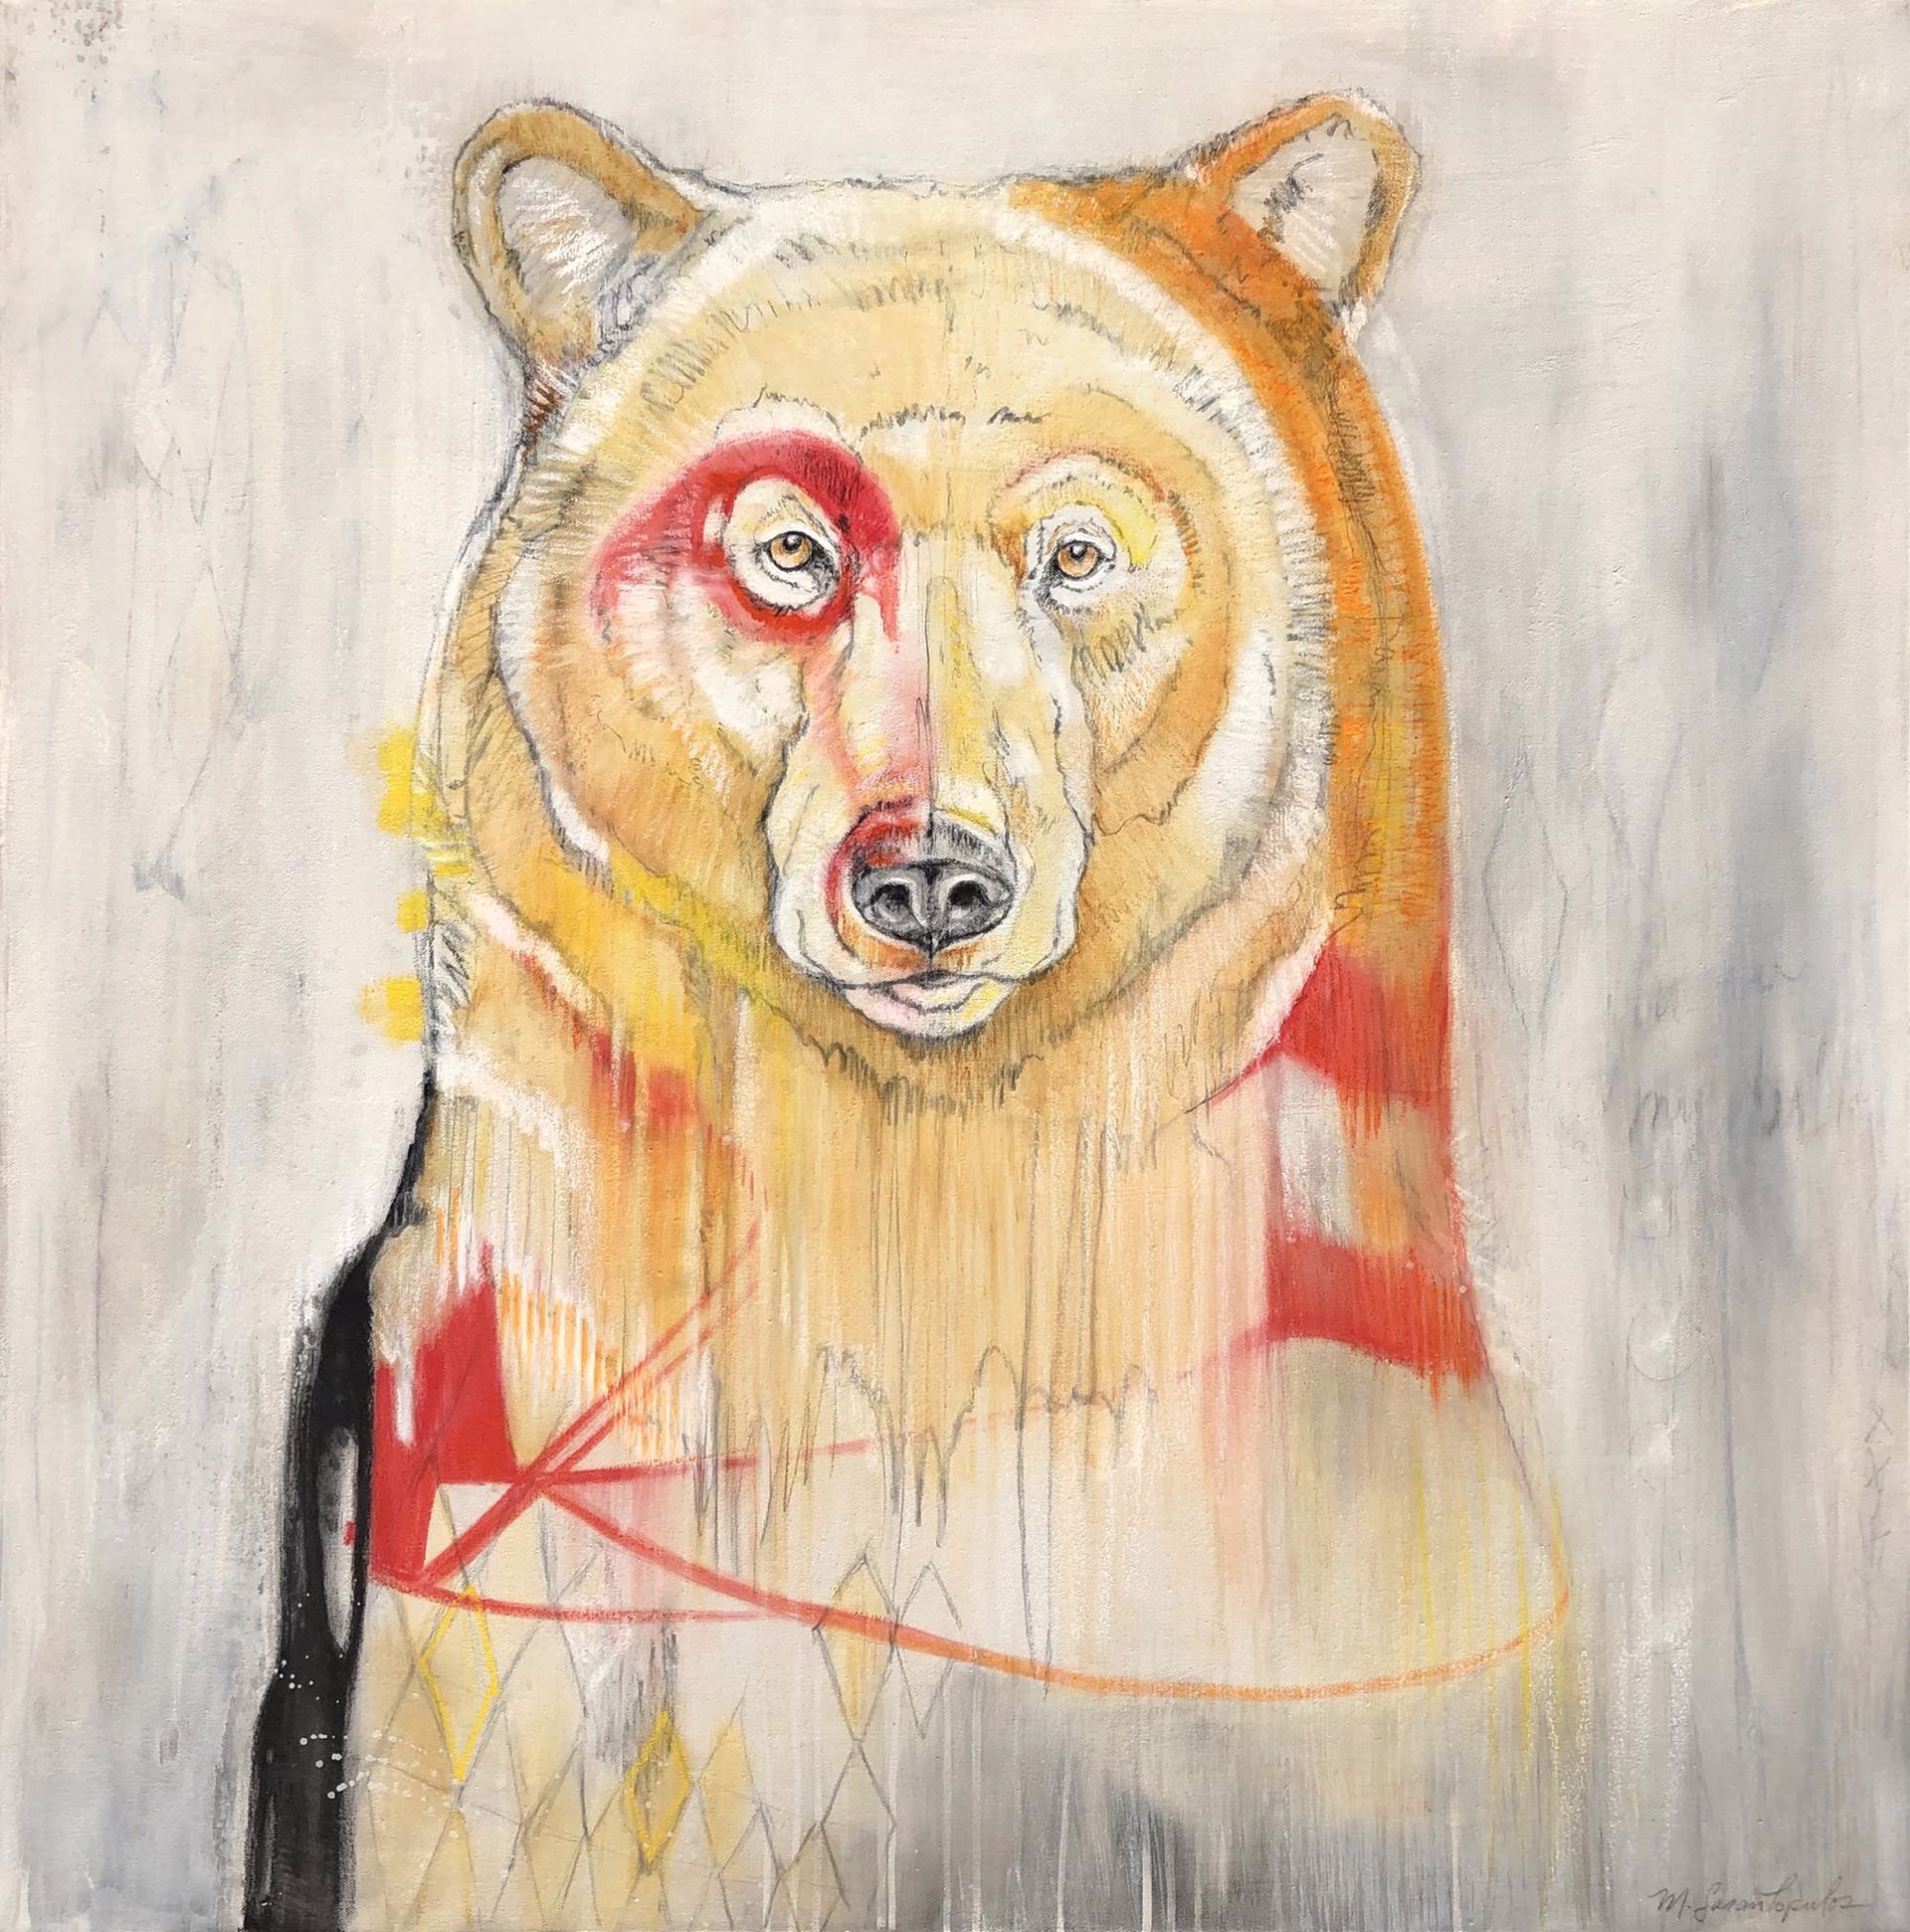 Original Mixed Media Painting Featuring A Grizzly Bear In Orange With Red Circle Around Left Eye Over Abstract Gray Background